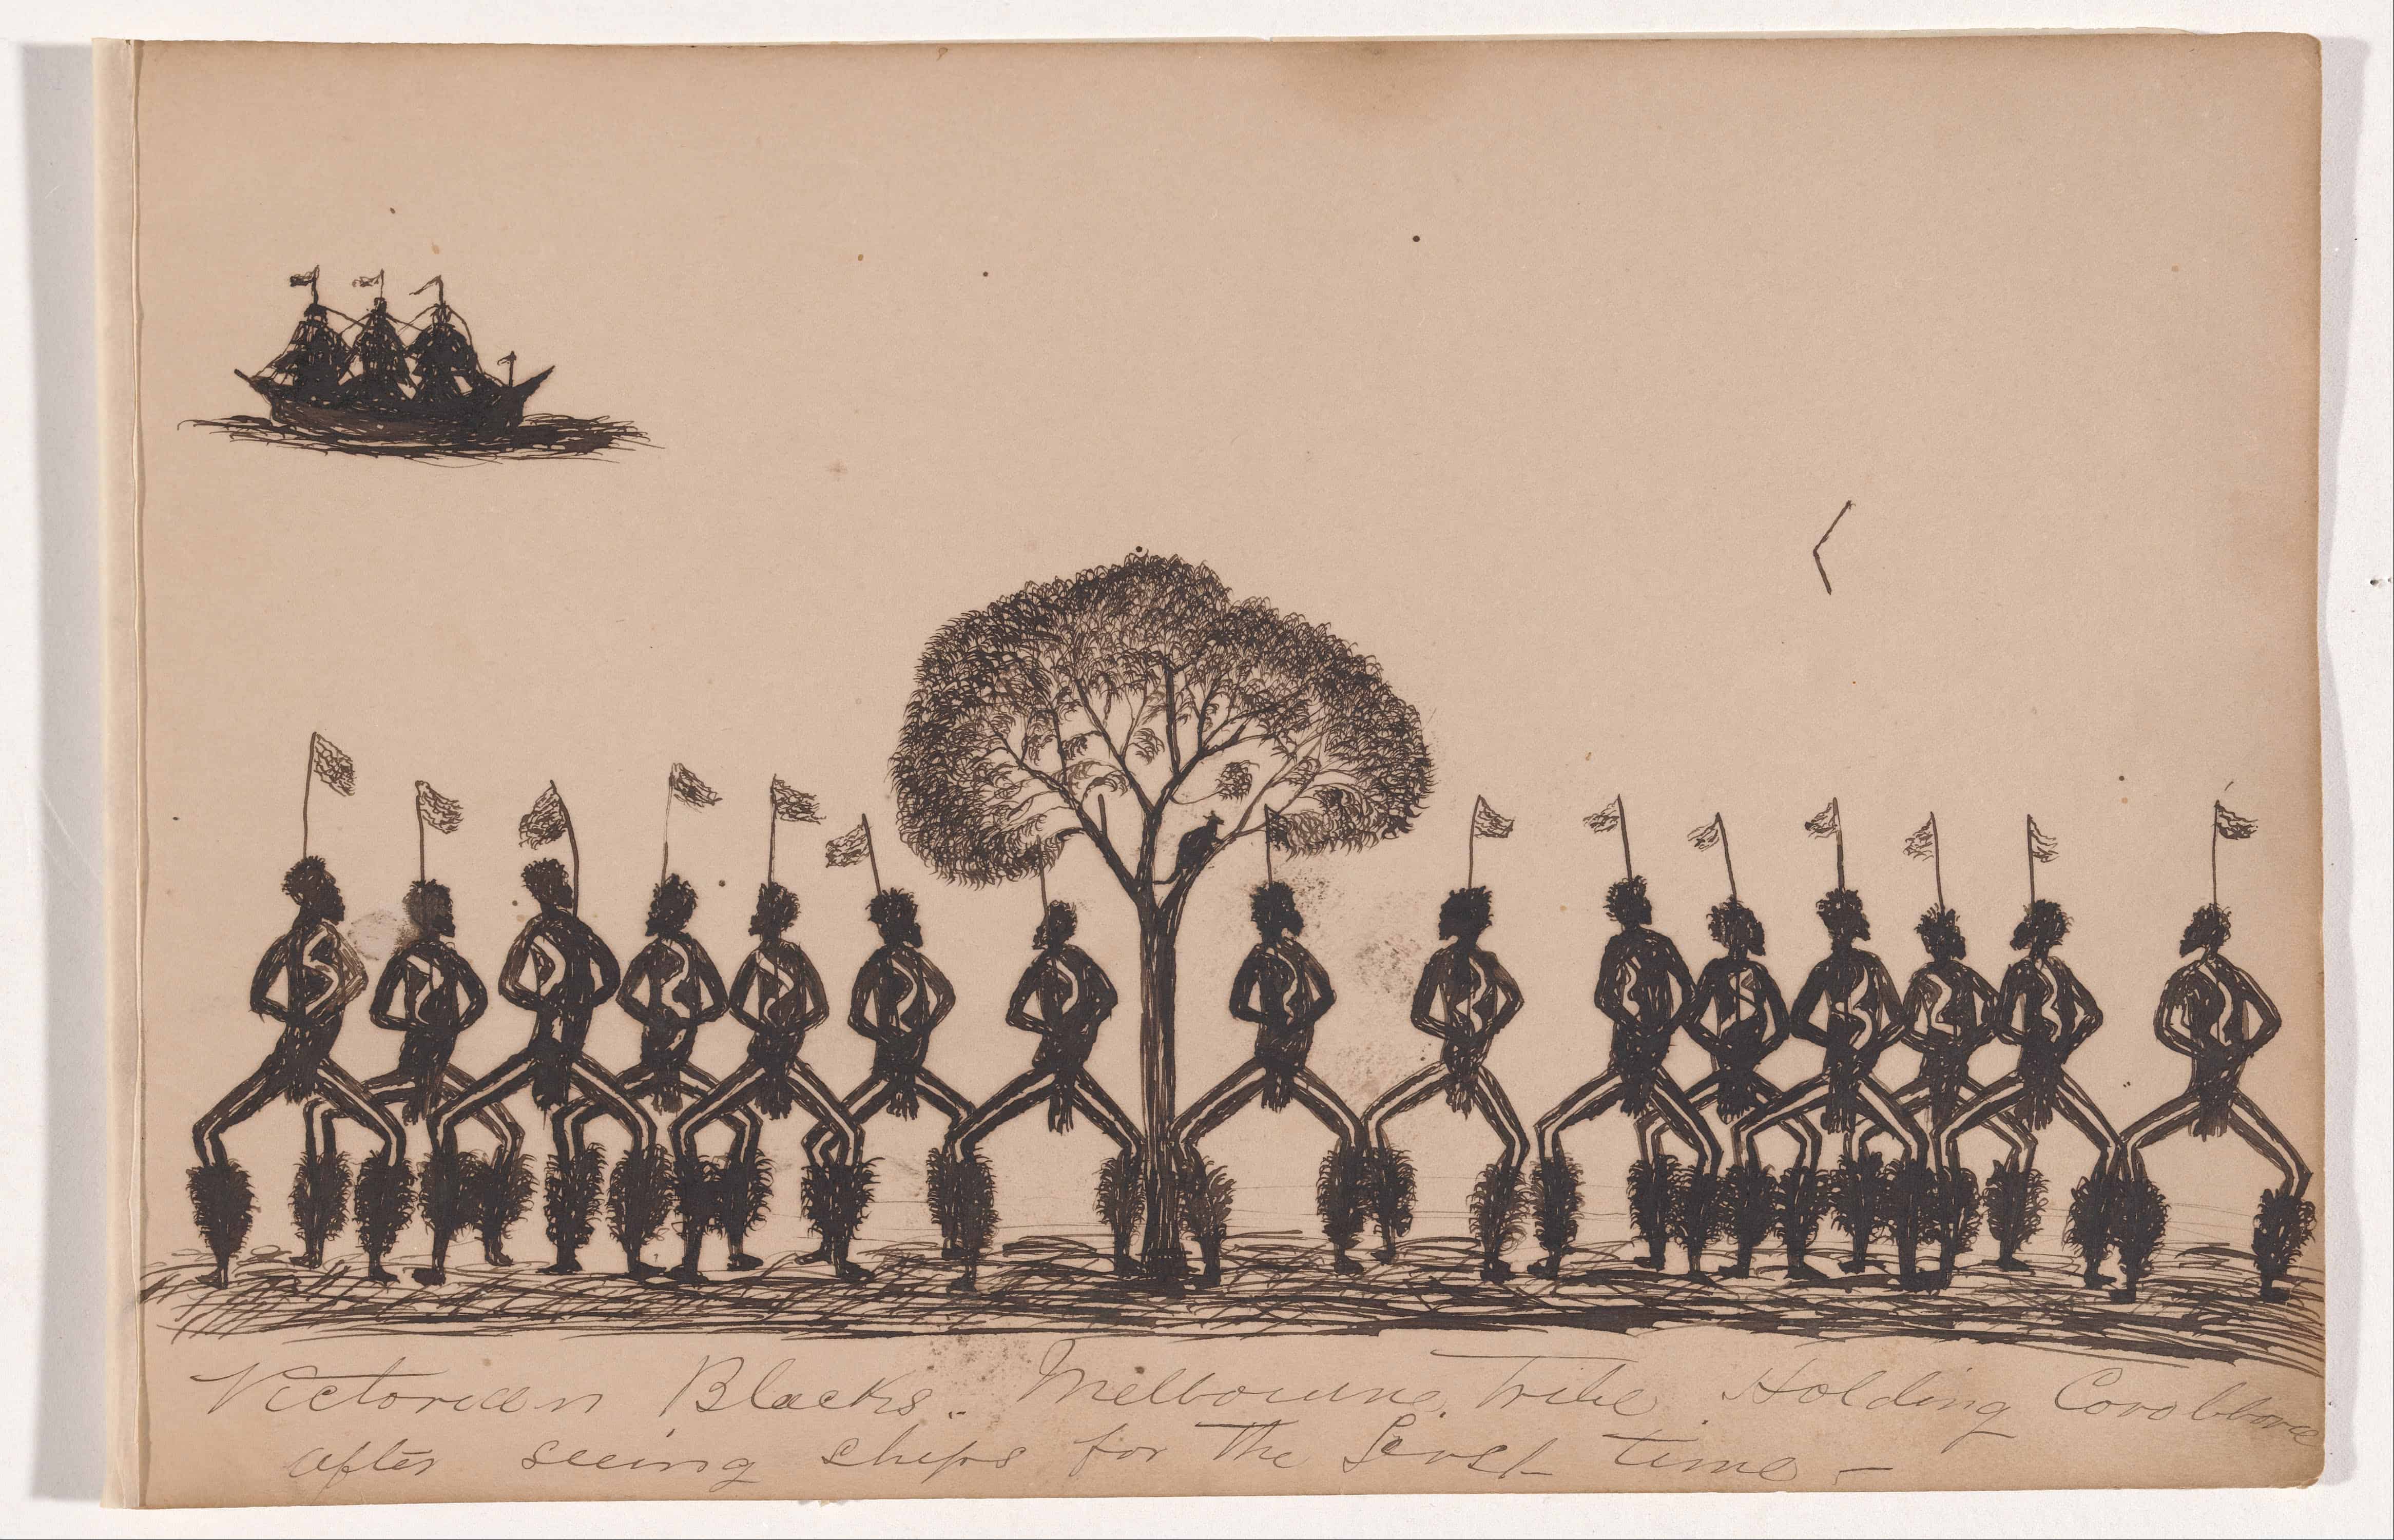 Tommy_McRAE_-_Kwatkwat_people_-_Victorian_Blacks_-_Melbourne_tribe_holding_corroboree_after_seeing_ships_for_the_first_time-Sketchbo..._-_Google_Art_Project